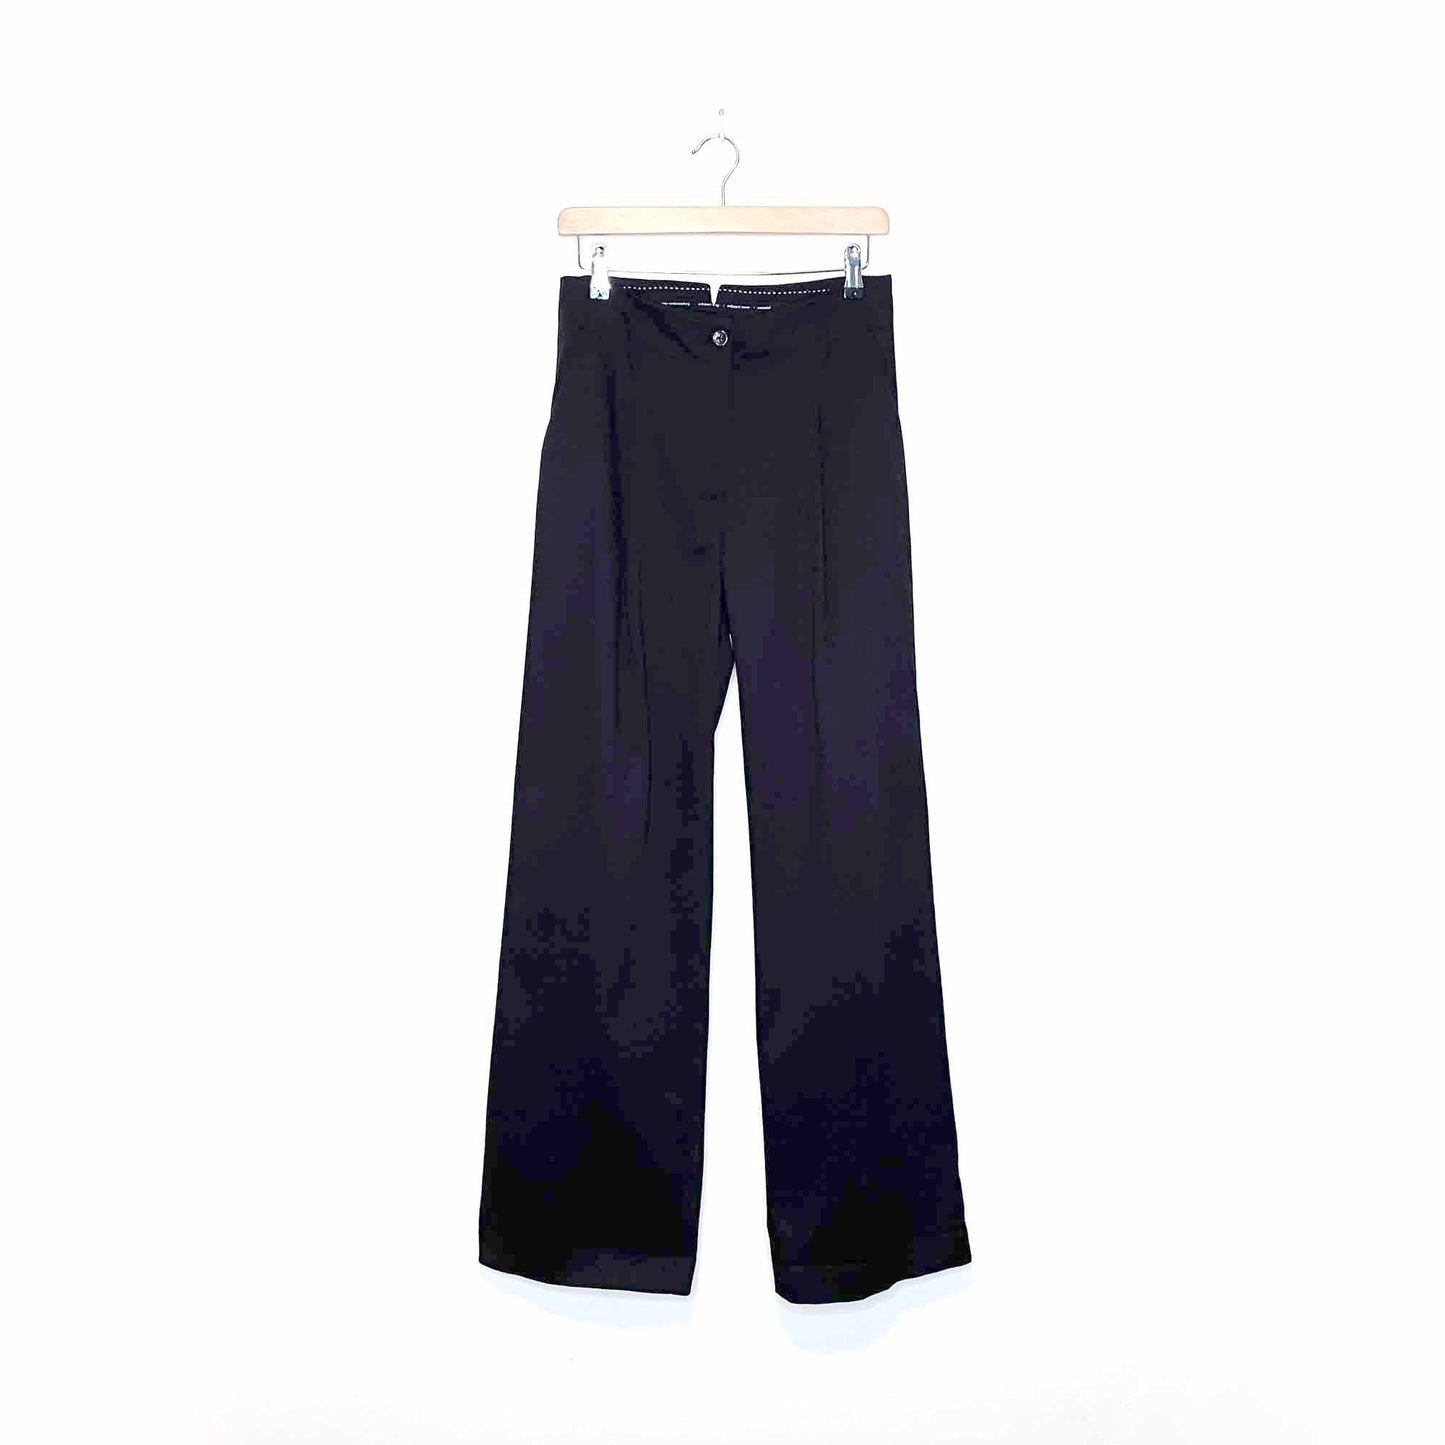 the essential wide leg high rise trouser by anthropologie - size 4